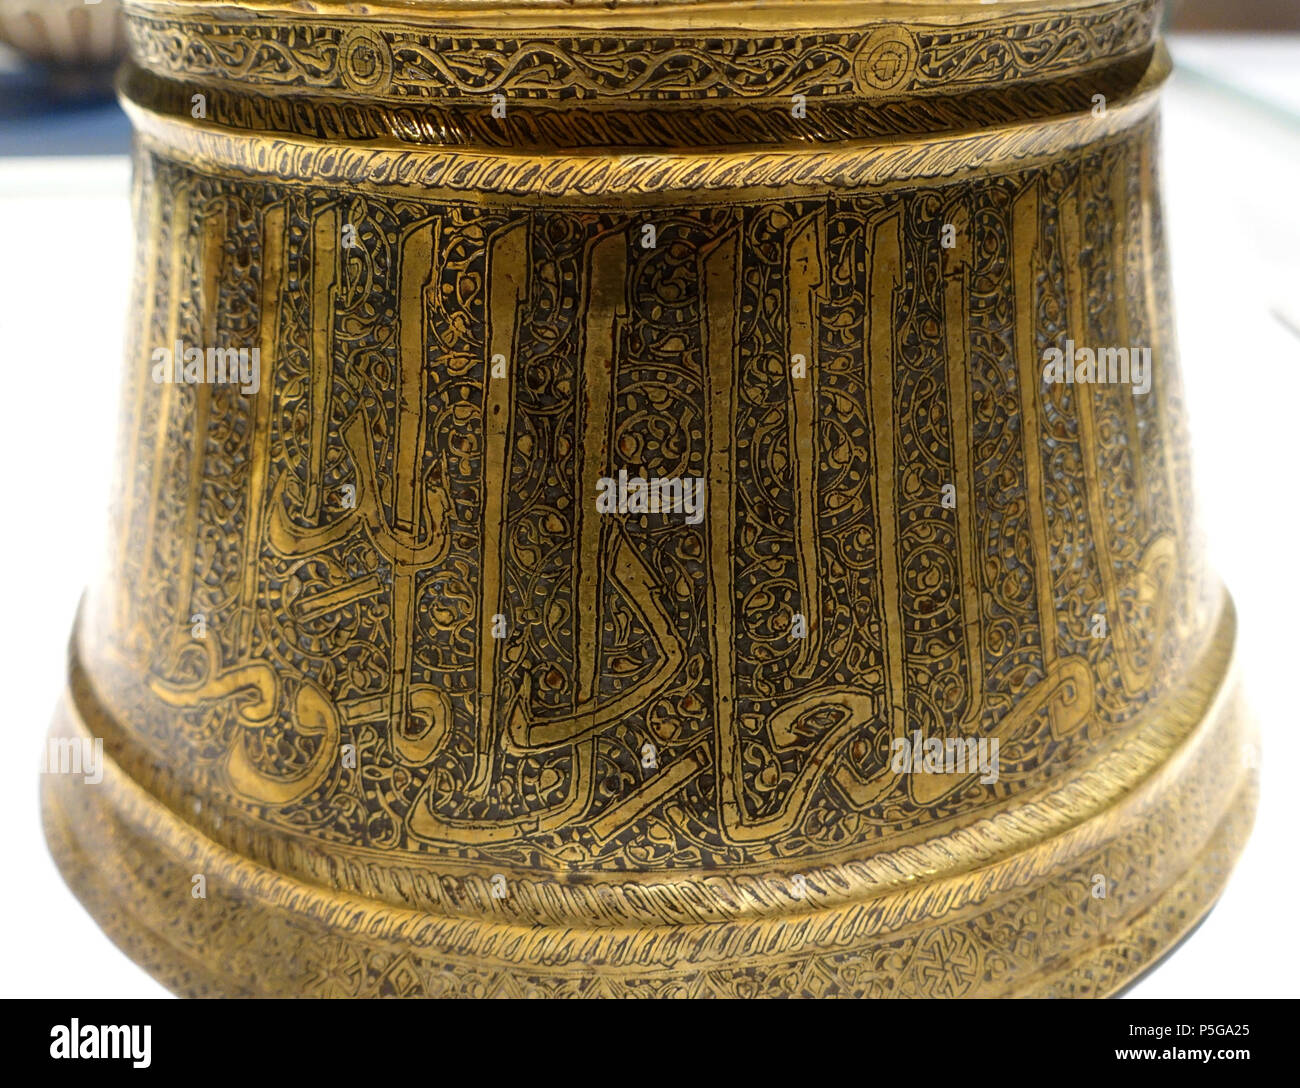 N/A. English: Exhibit in the Aga Khan Museum - Toronto, Canada. This work is old enough so that it is in the . Photography was permitted in the museum without restriction. 6 October 2015, 12:19:05. Daderot 267 Candlestick with Solos script, Iran, mid to late 14th century AD, brass, formerly inlaid with silver and gold, view 2 - Aga Khan Museum - Toronto, Canada - DSC06710 Stock Photo